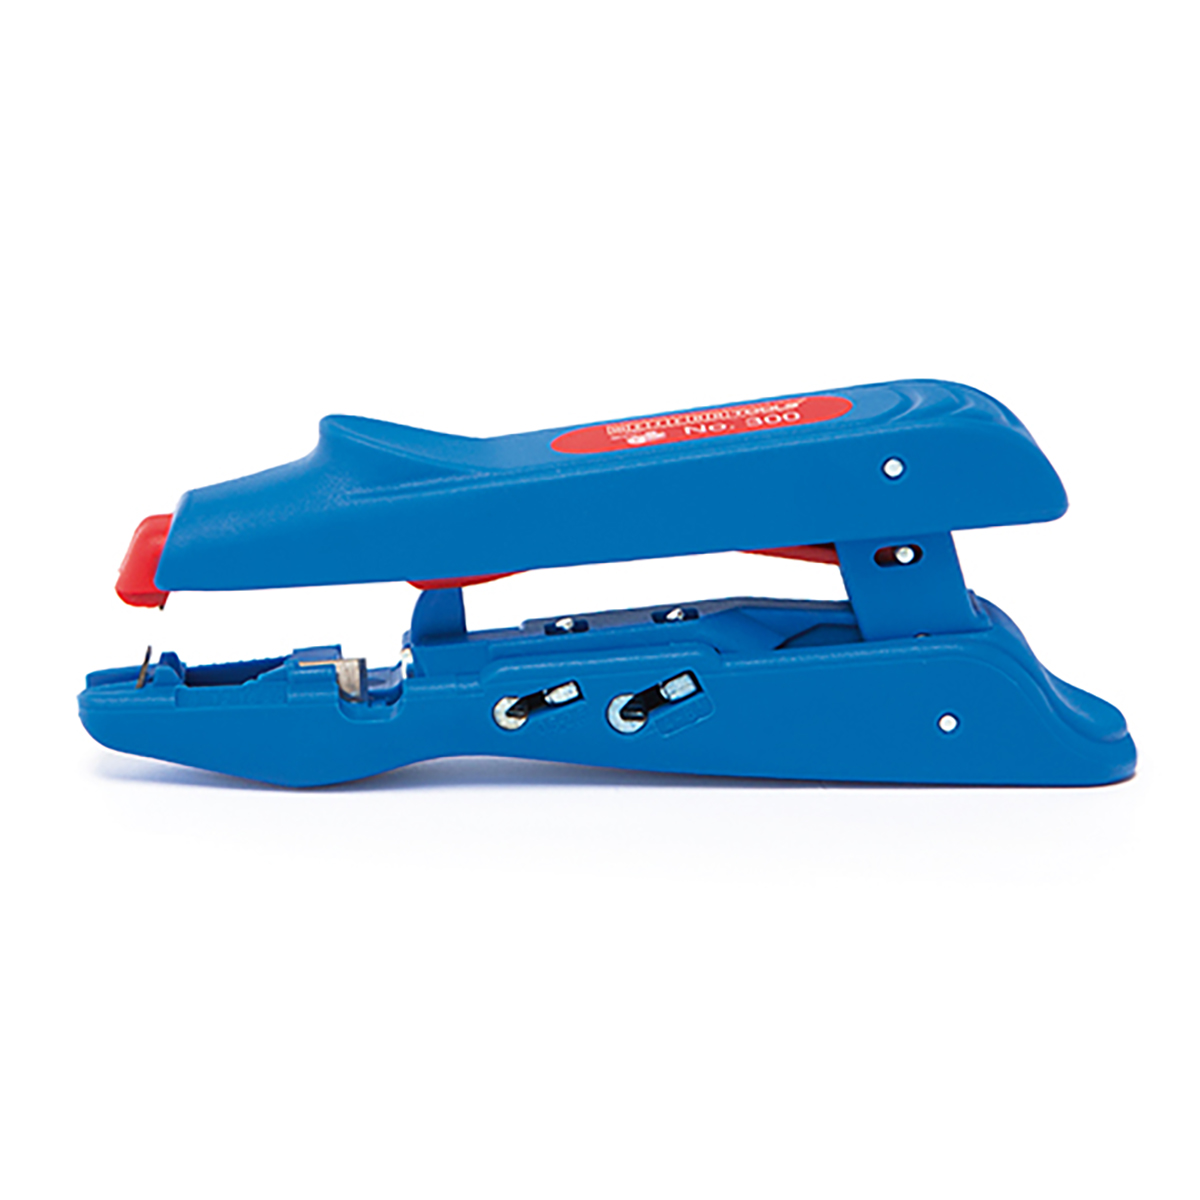 Weicon Duo-Crimp No 300 Crimping and Stripping Tool